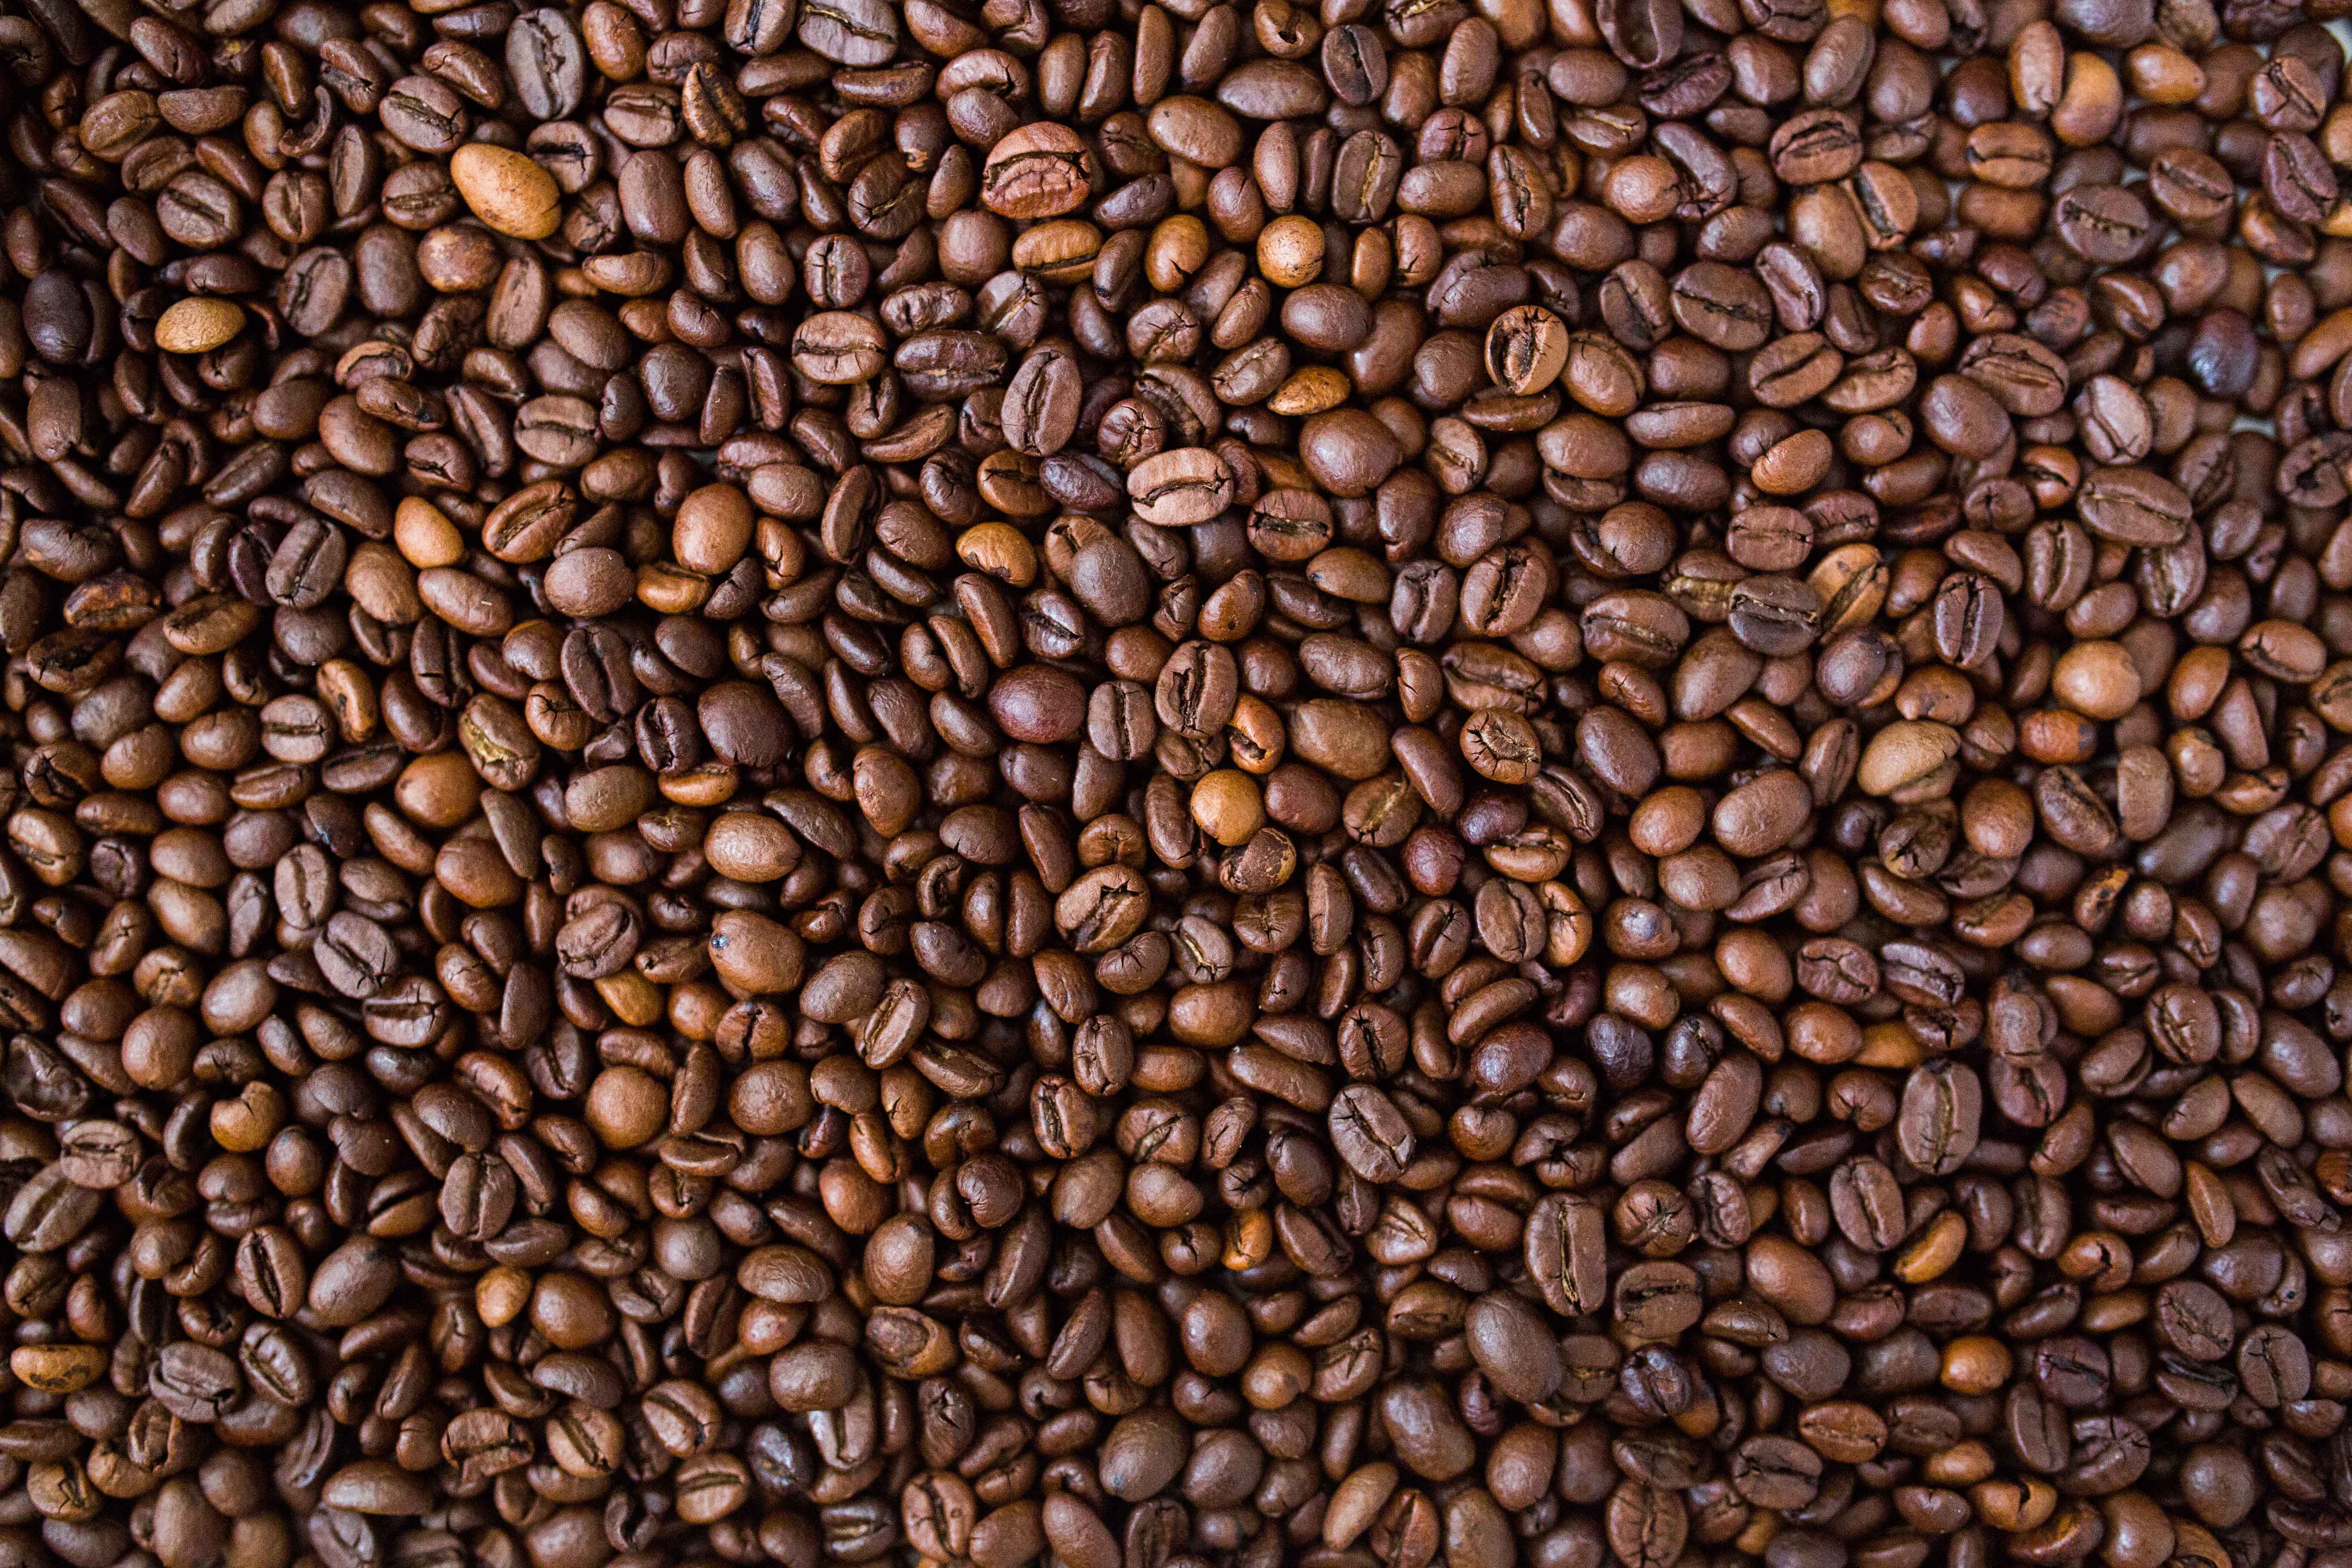 Coffee is full of nutrients and antioxidants